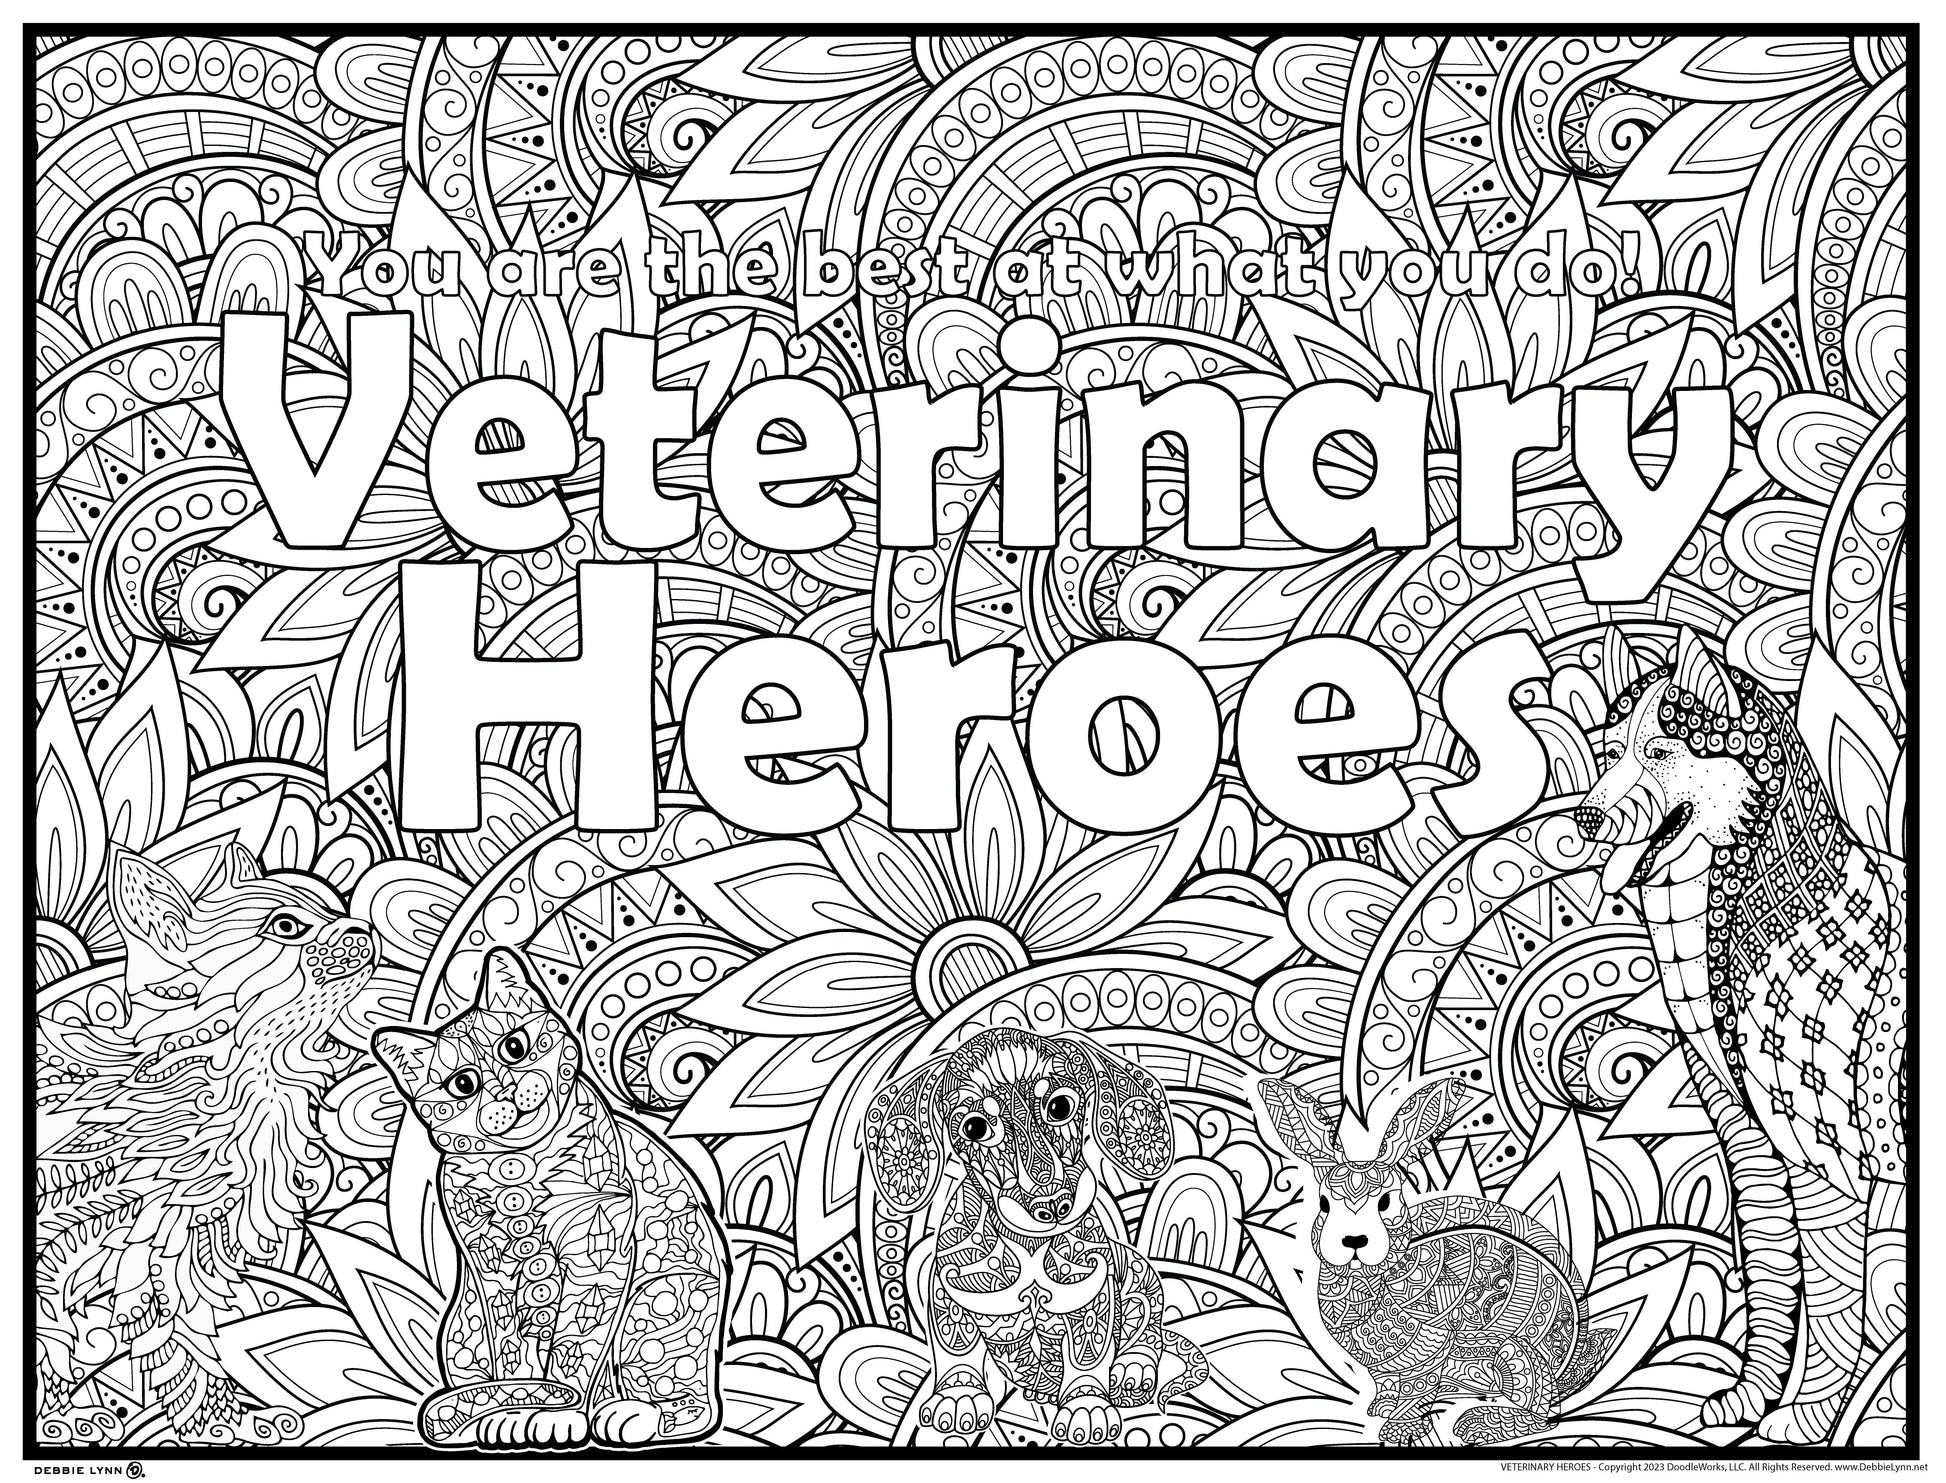 Veterinary Heroes Personalized Giant Coloring Poster 48 x 63